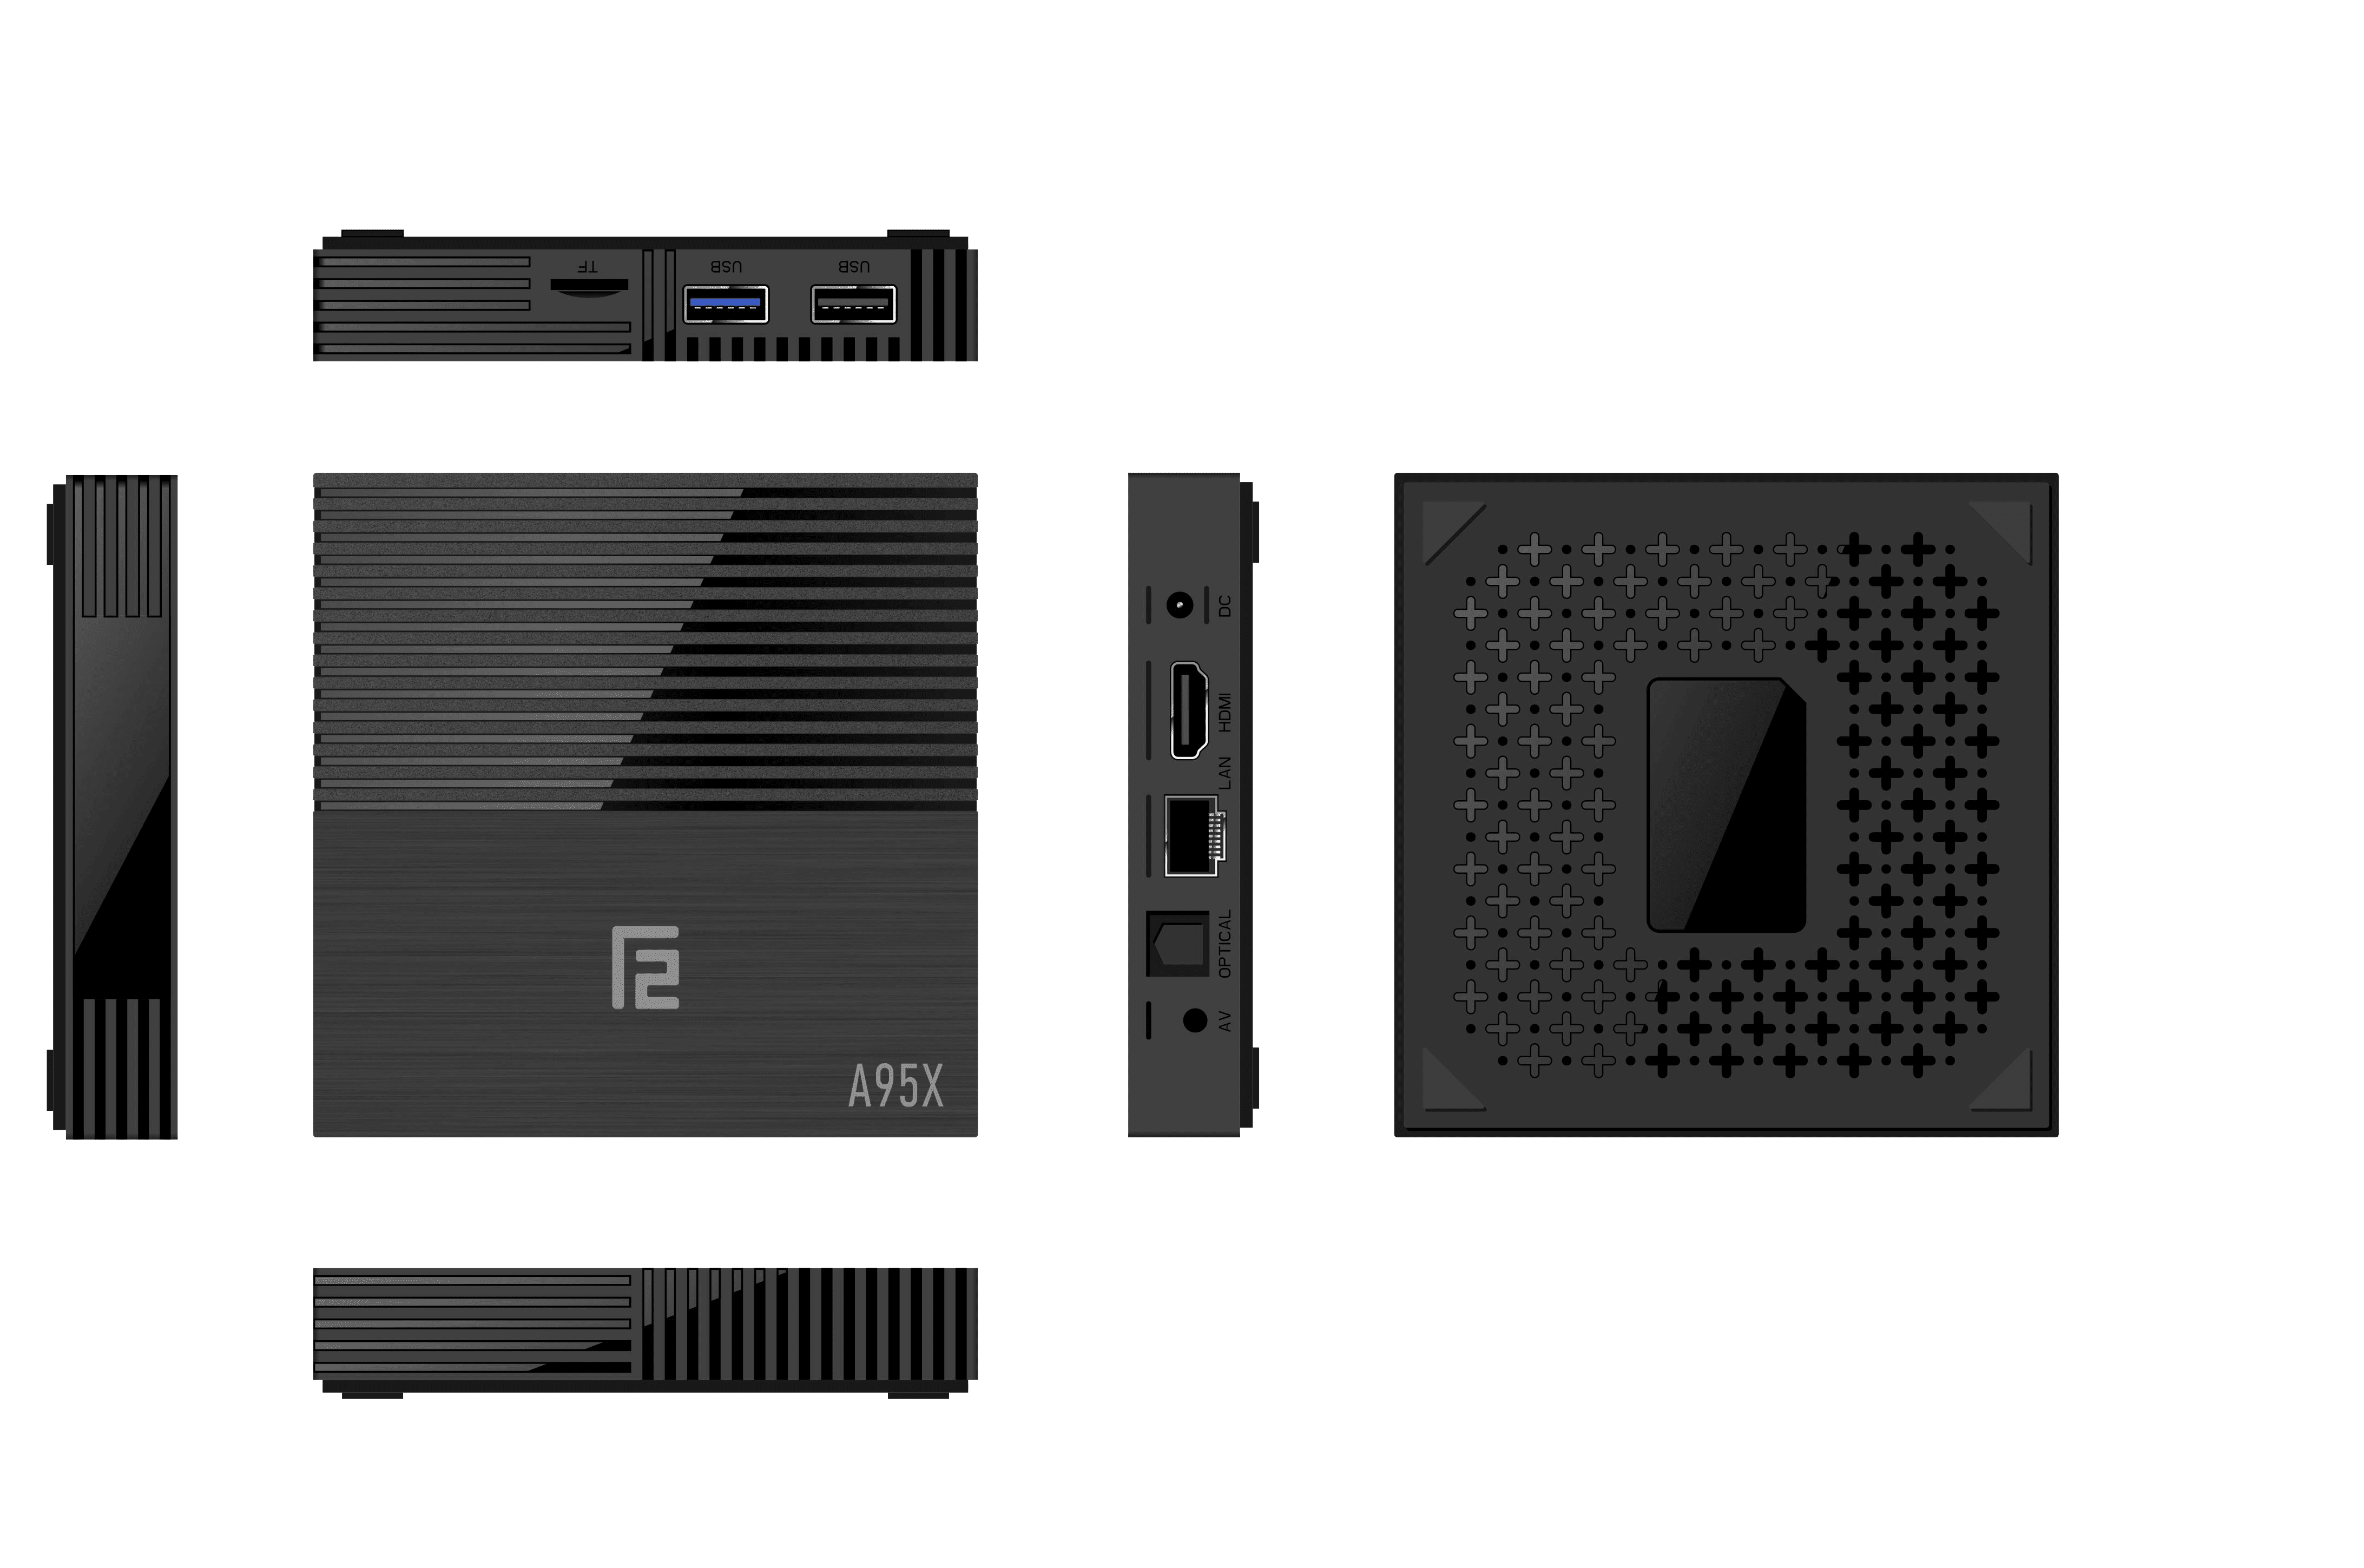 A95X F2 Android 9 Pie Smart TV BOX - Rendering